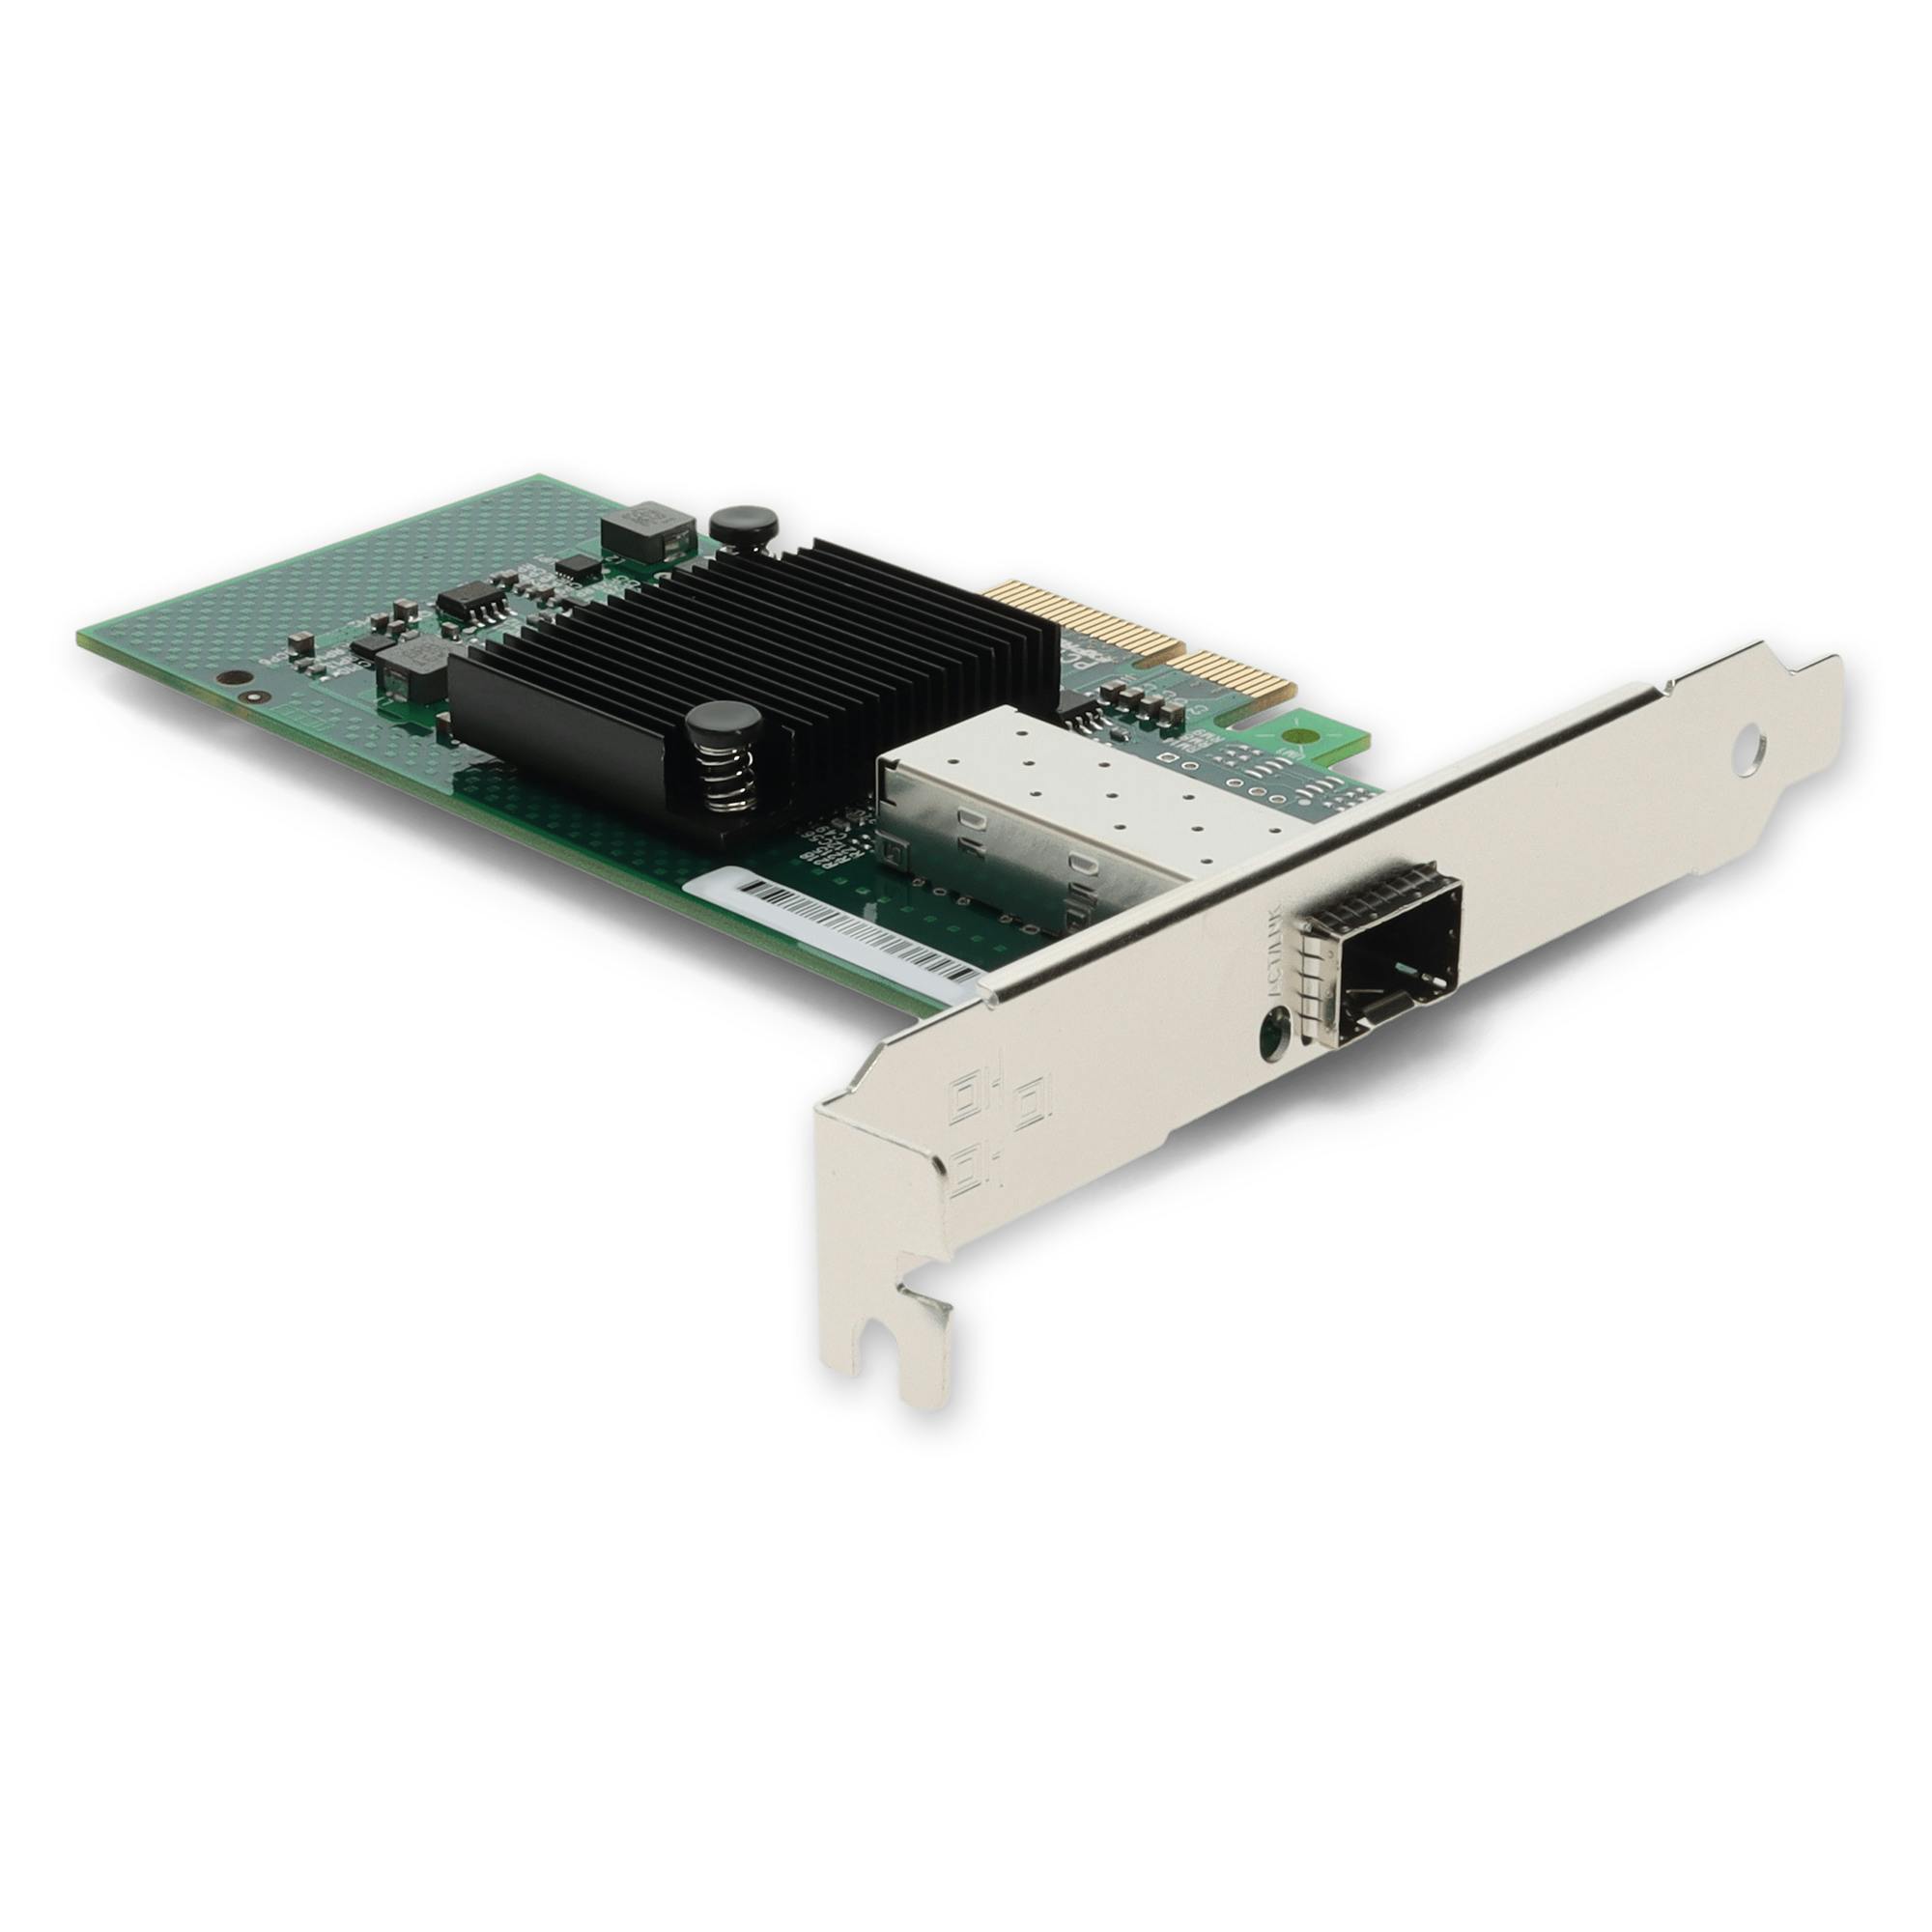 Add-On Computer Network Adapter ADD-PCIE-1SFP